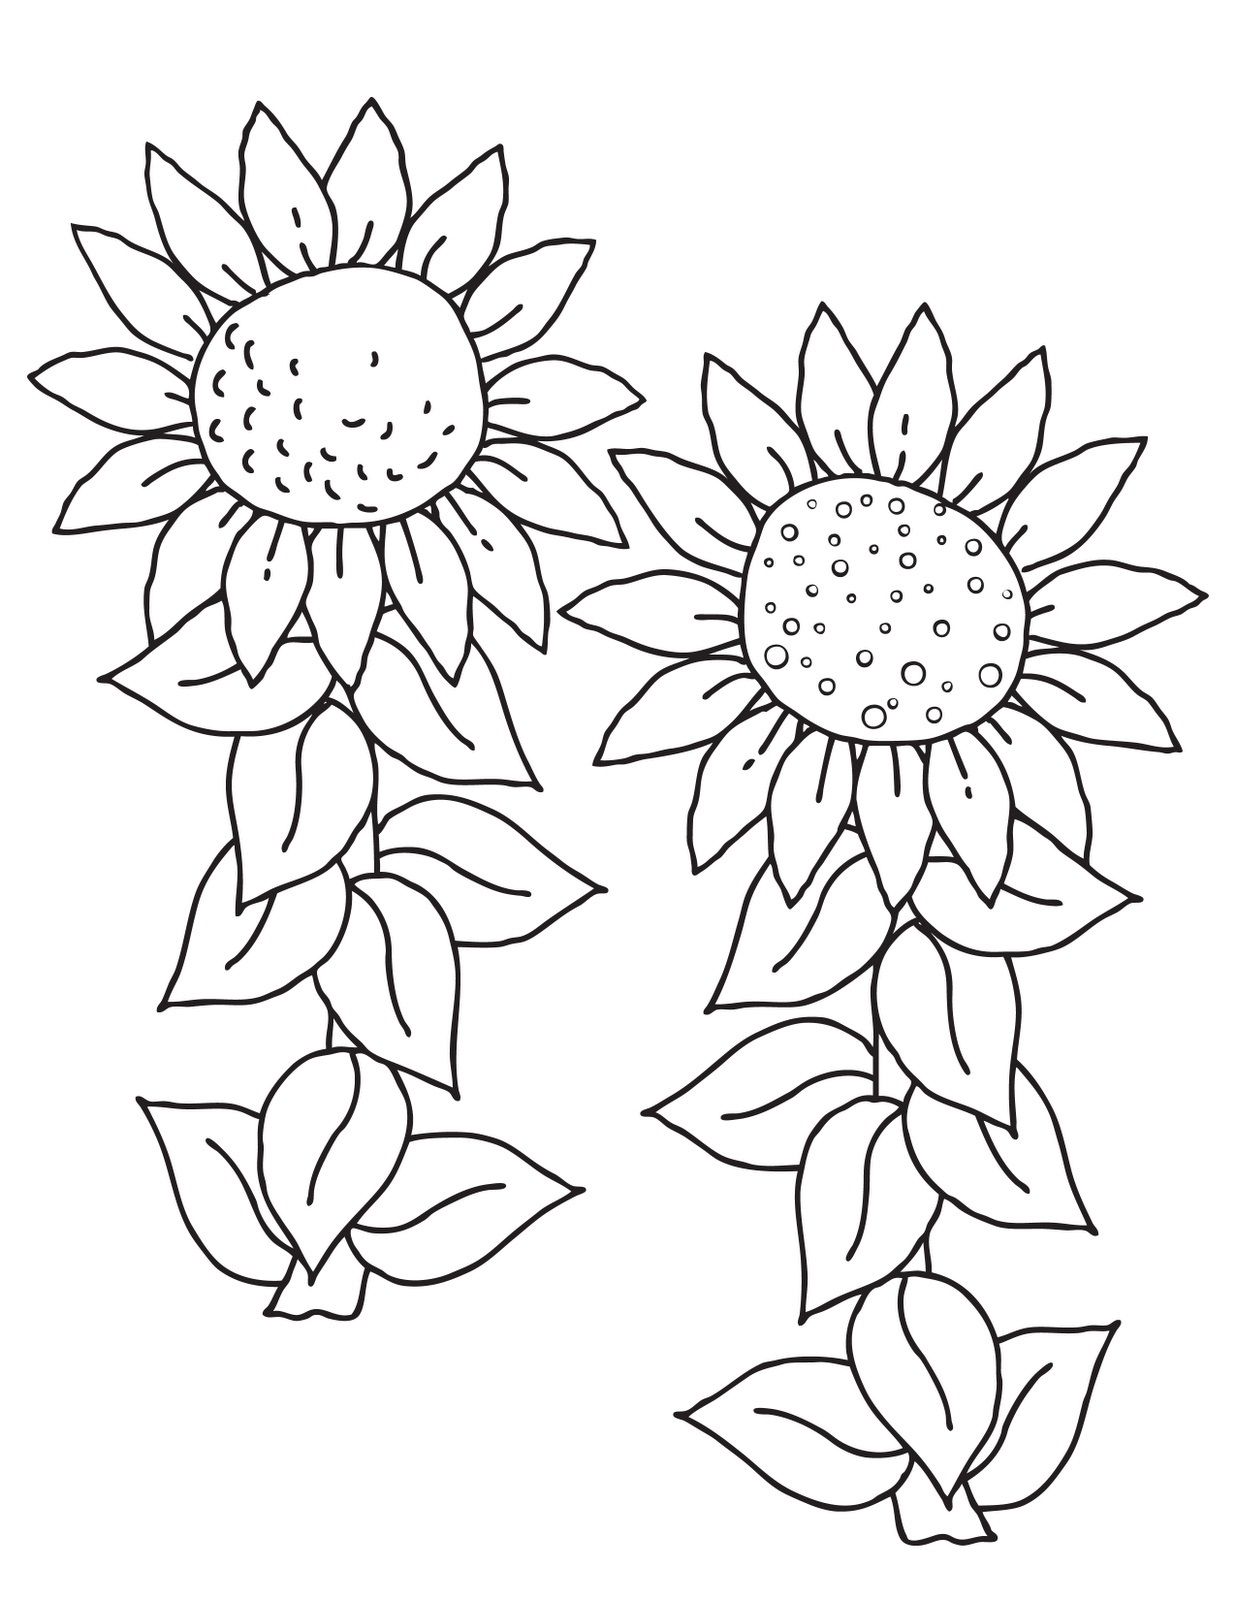 Free-Sunflower-Coloring-Pages.jpg